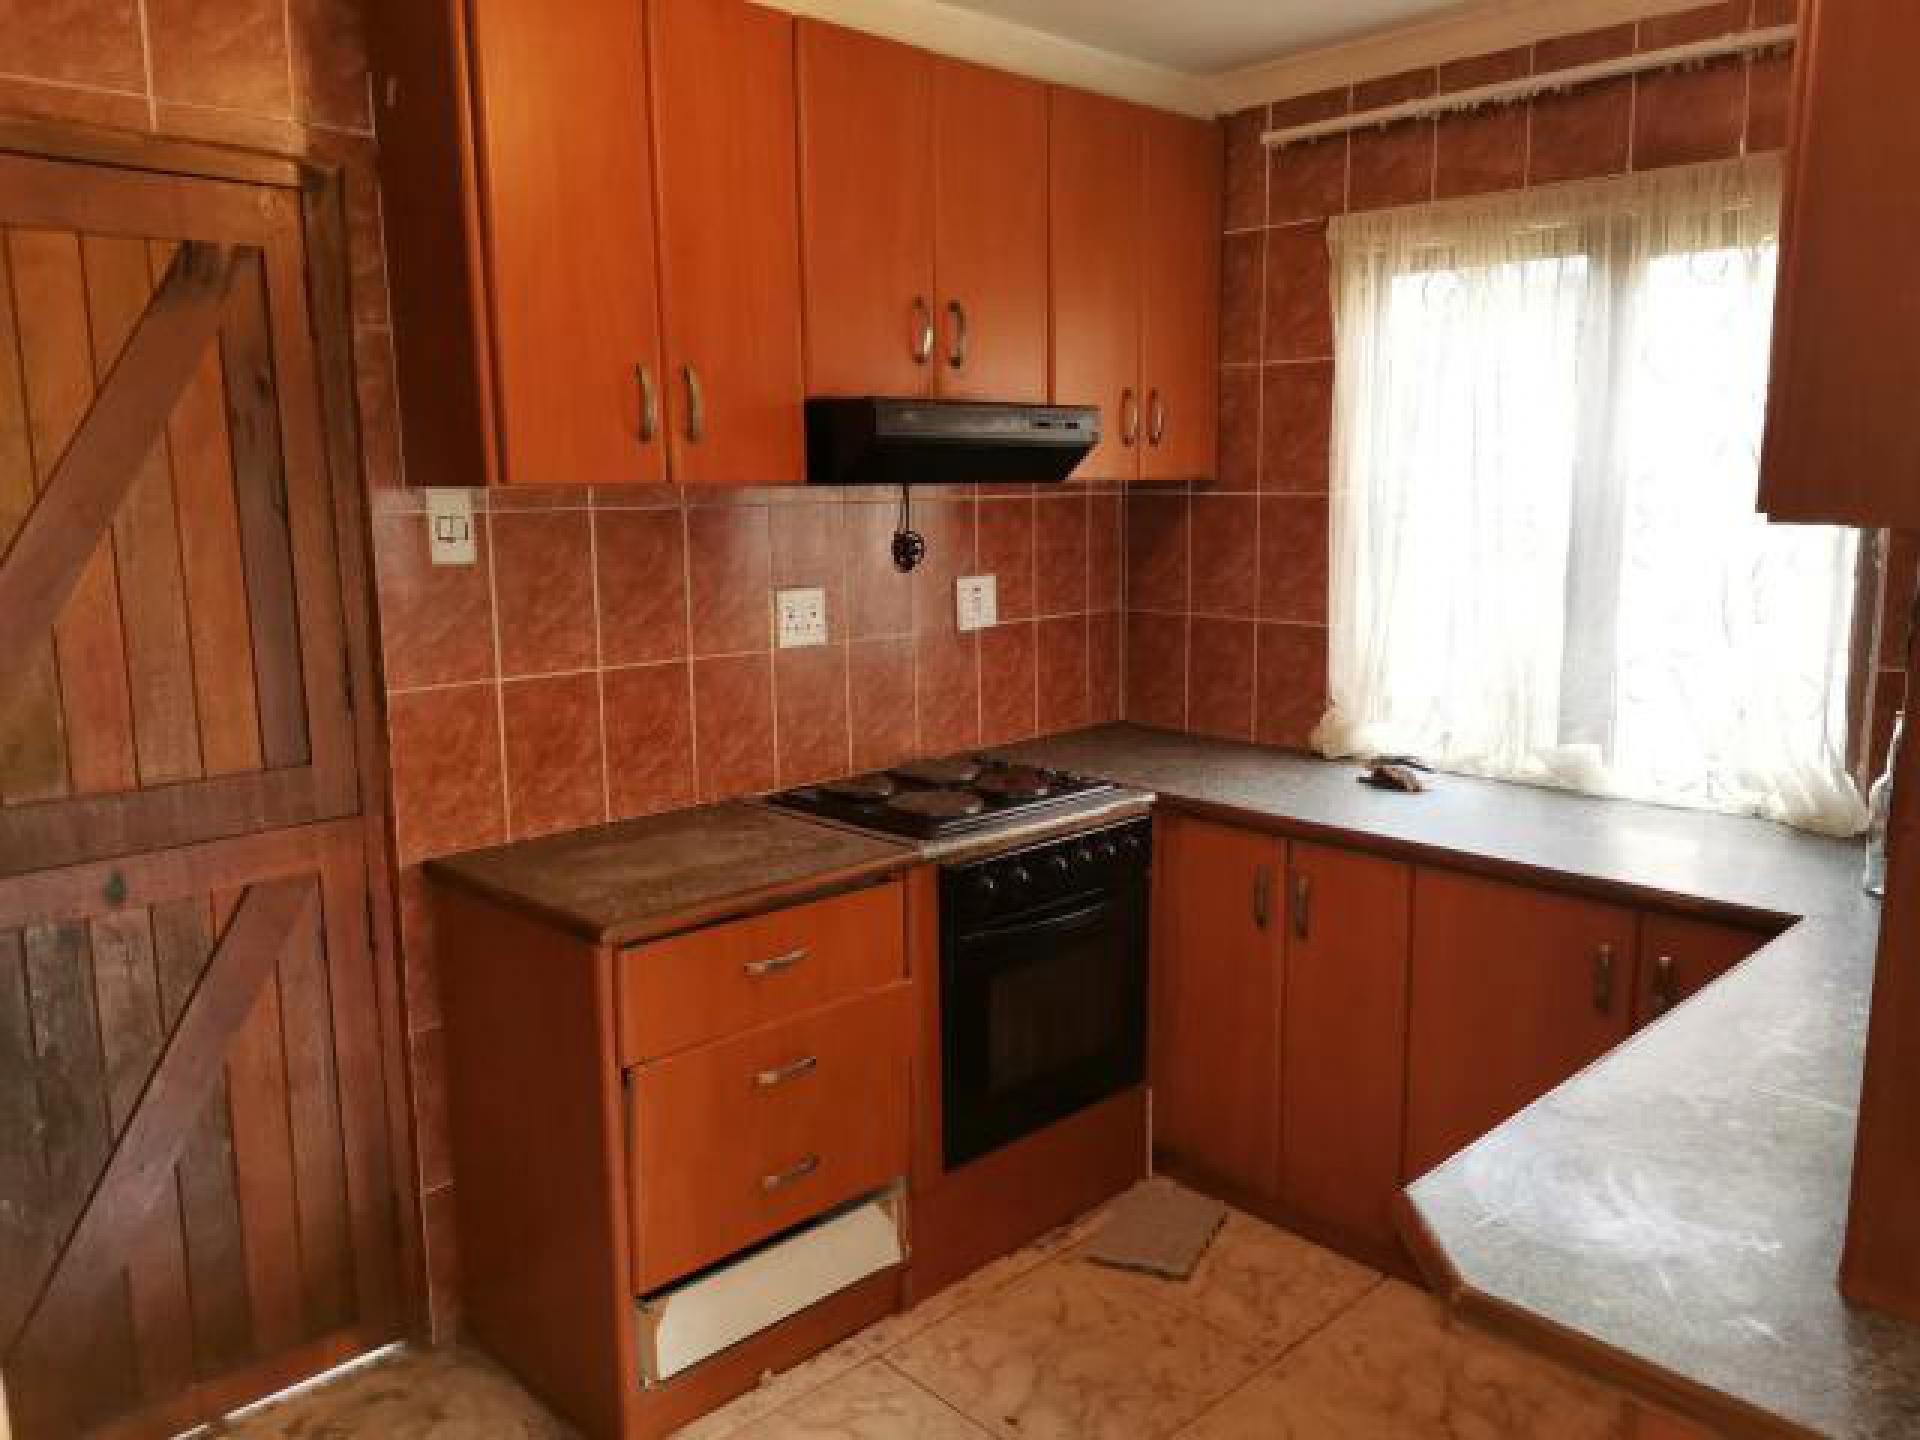 Kitchen of property in Wiggins